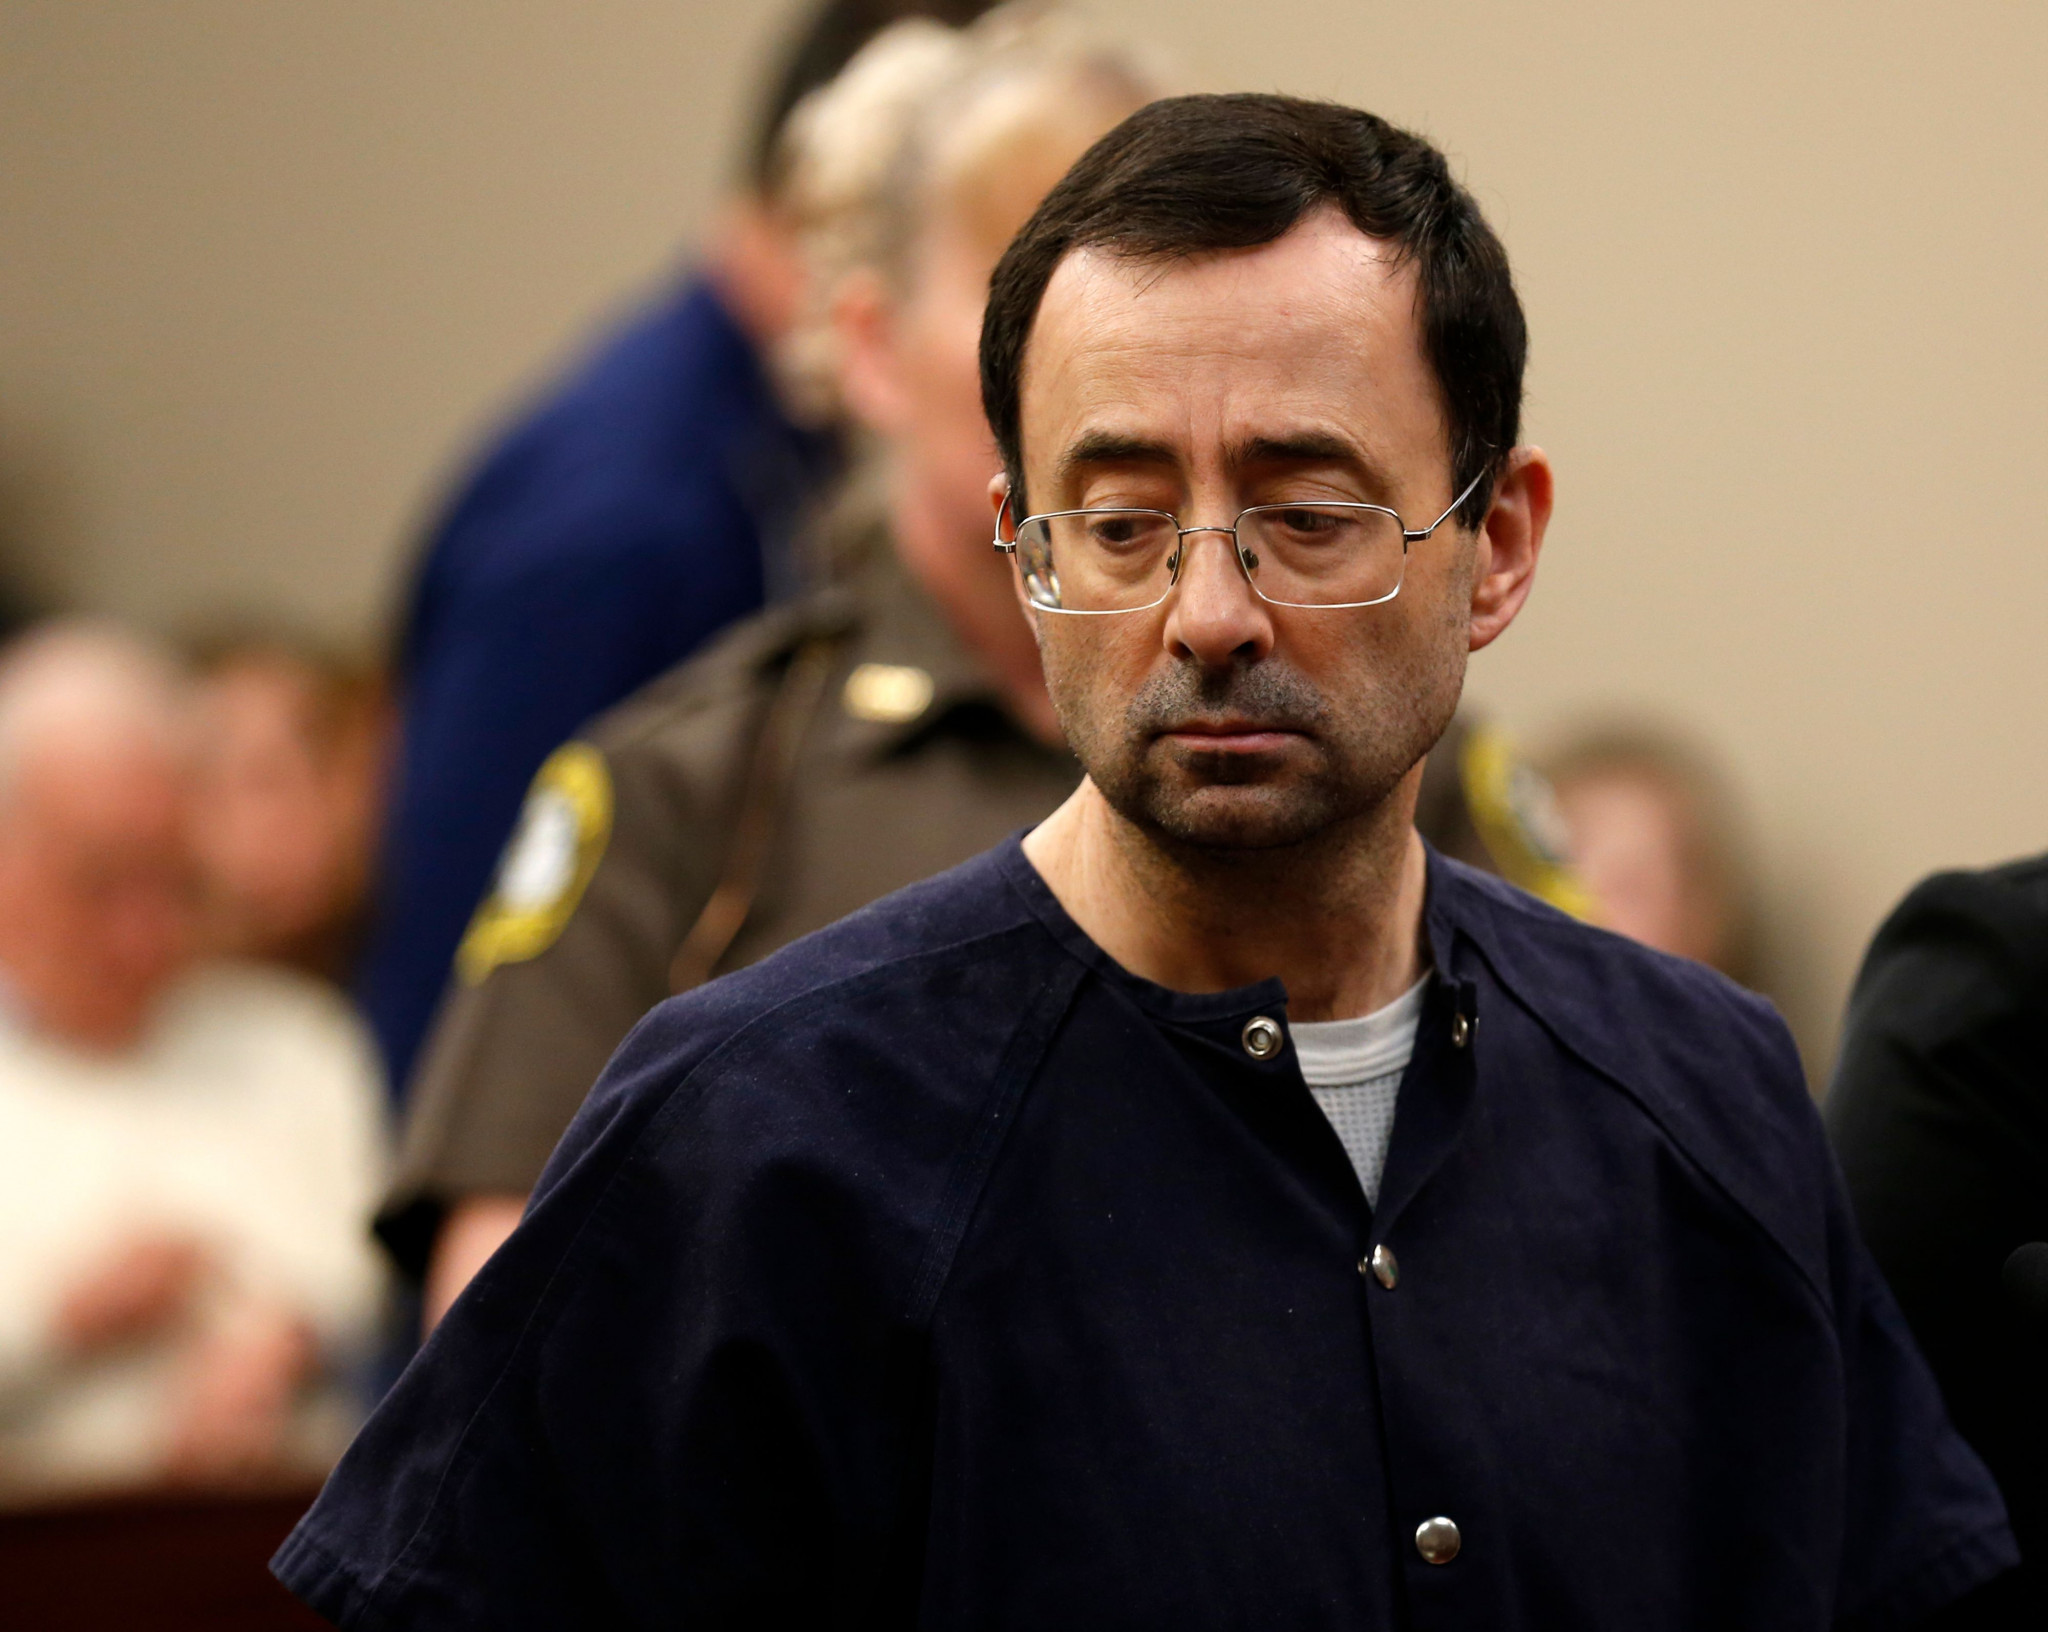 Nassar sentenced to up to 175 years in prison for criminal sexual abuse